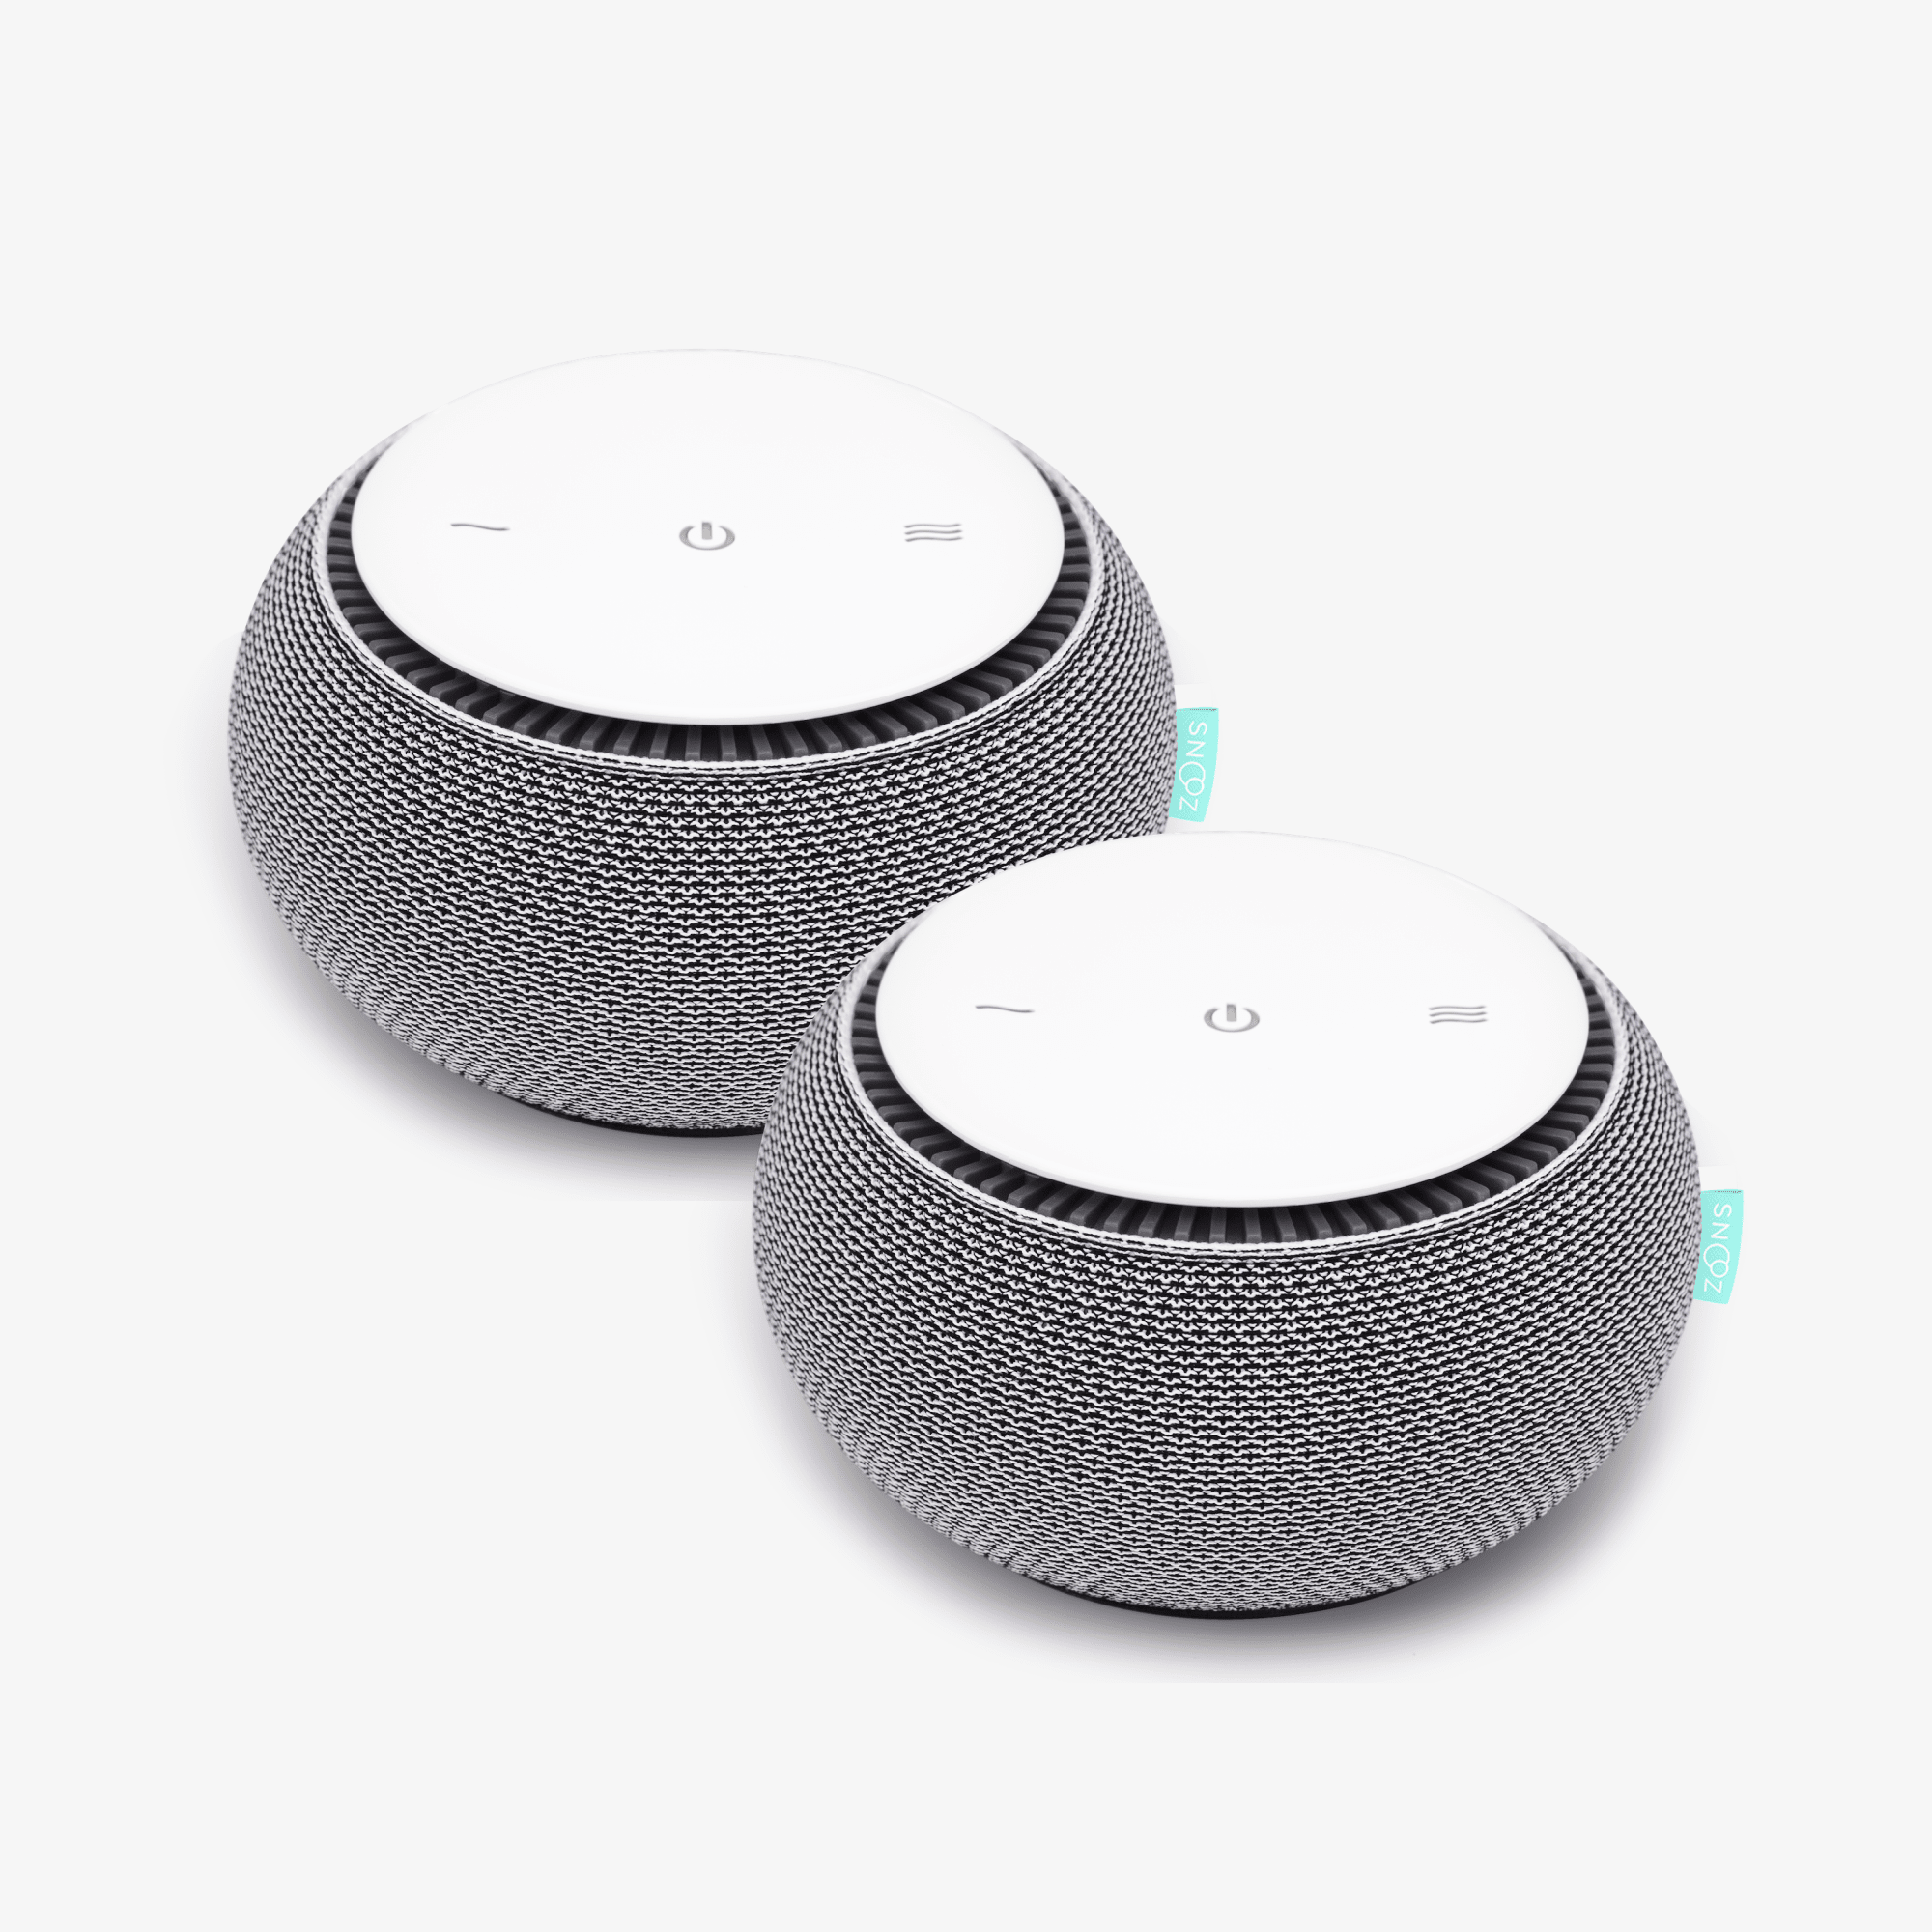 SNOOZ White Noise Machine with Real Fan Inside to Make You Fall Asleep  Easily - Tuvie Design